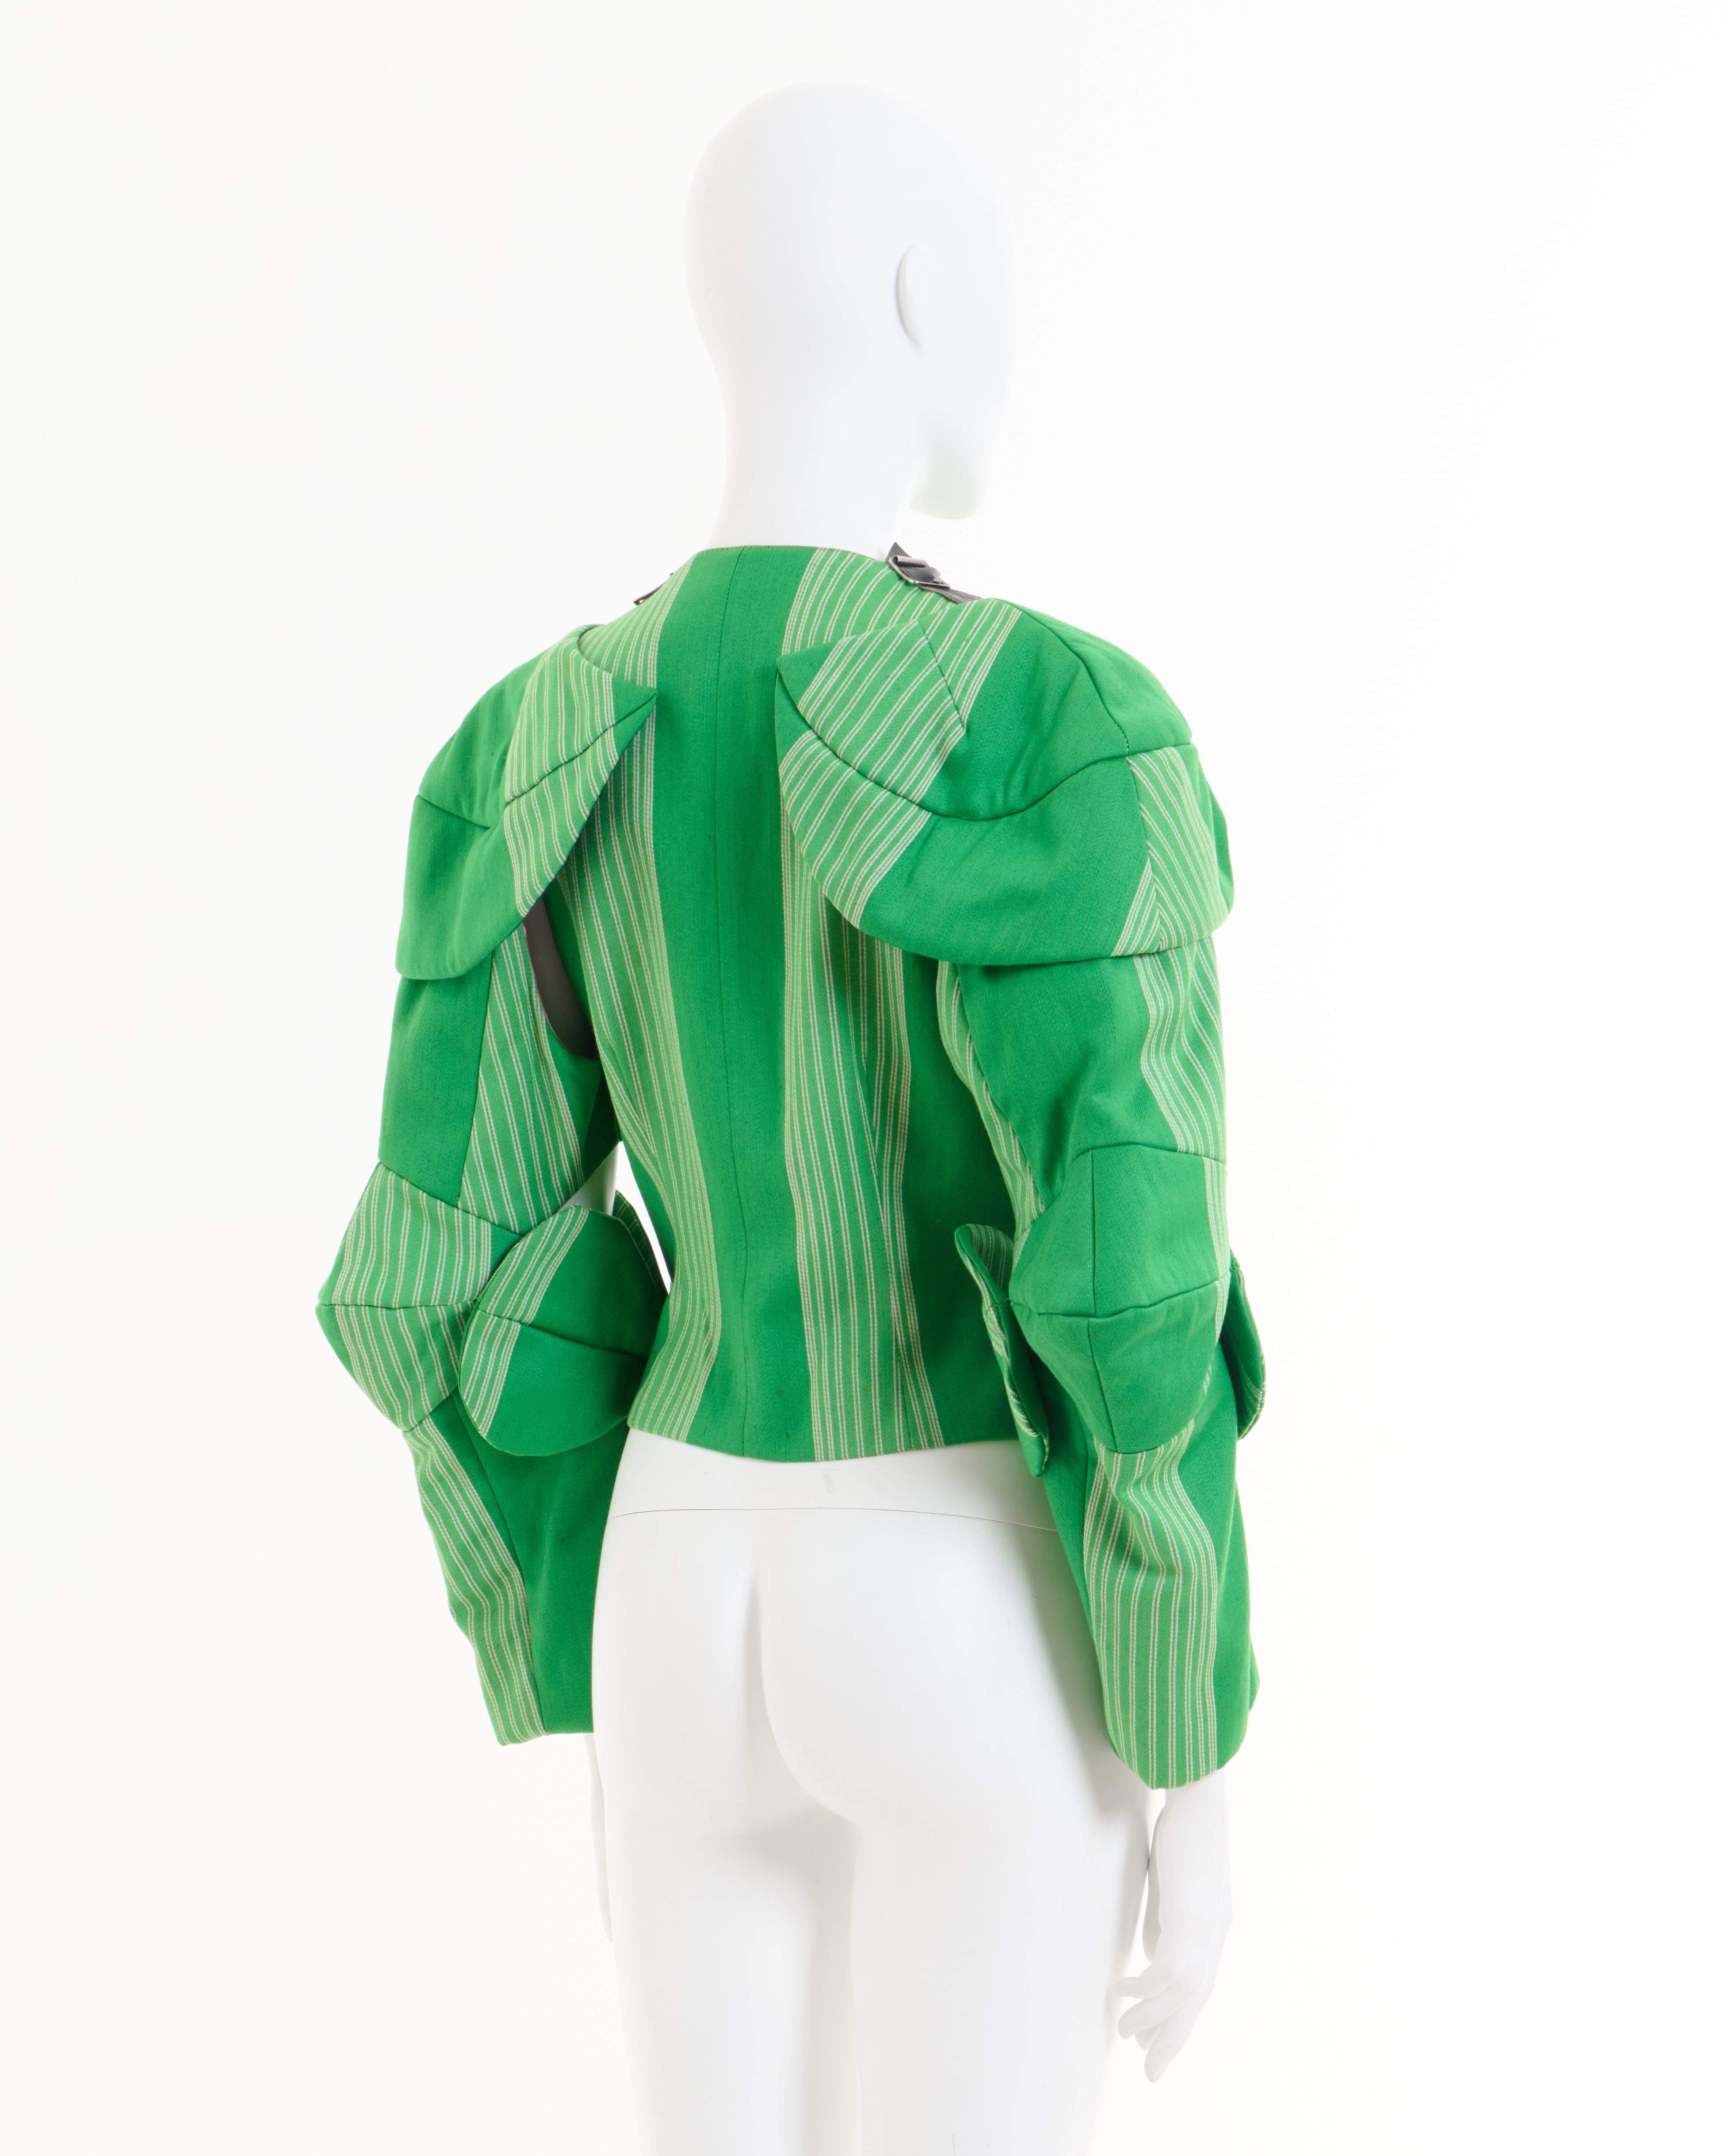 Vivienne Westwood  F/W 1988/89 ‘Time Machine’ Green striped Armour jacket For Sale 2